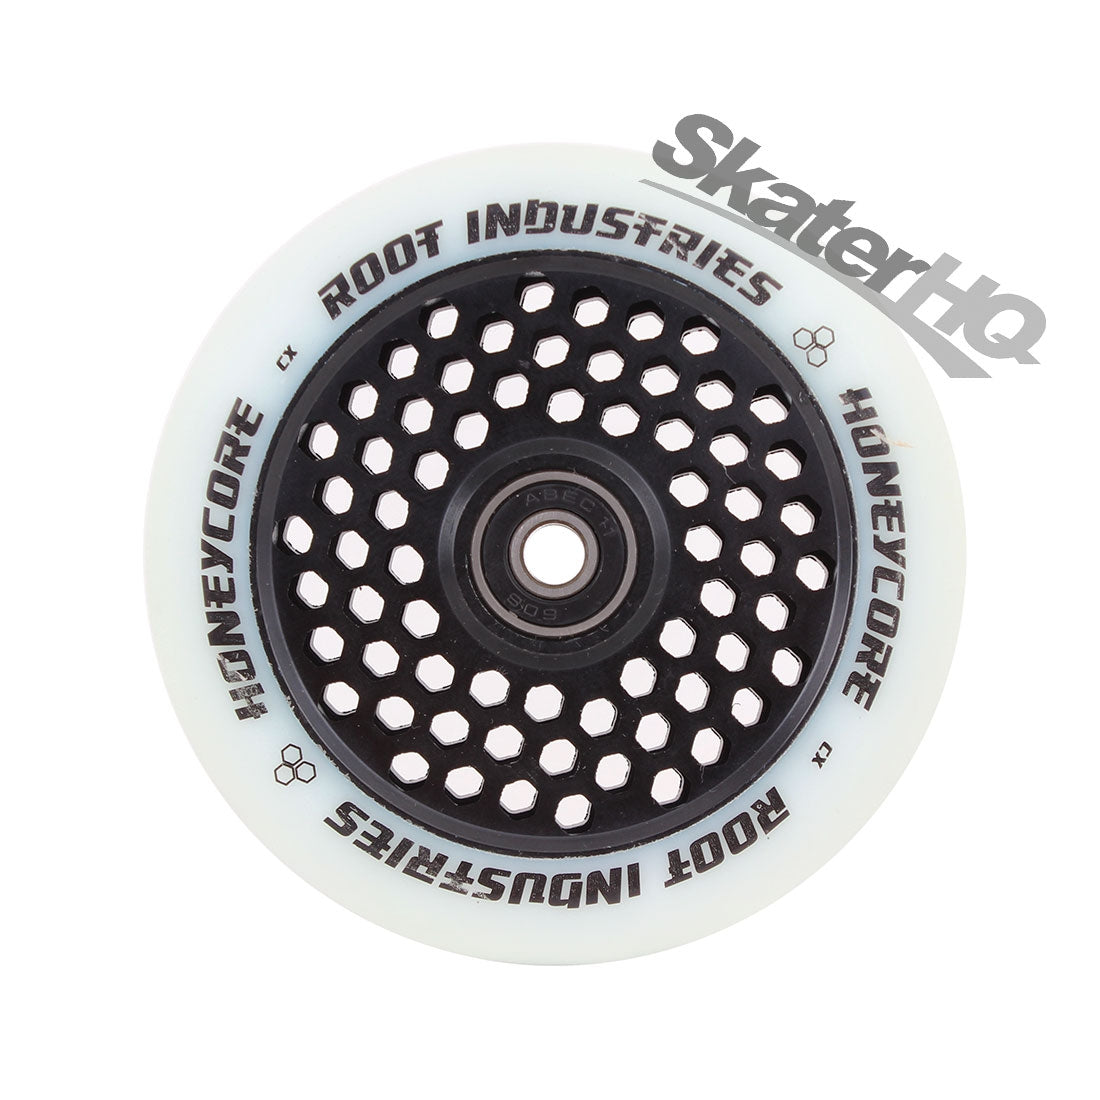 Root Industries Honey Core 110mm - White/Black Scooter Wheels